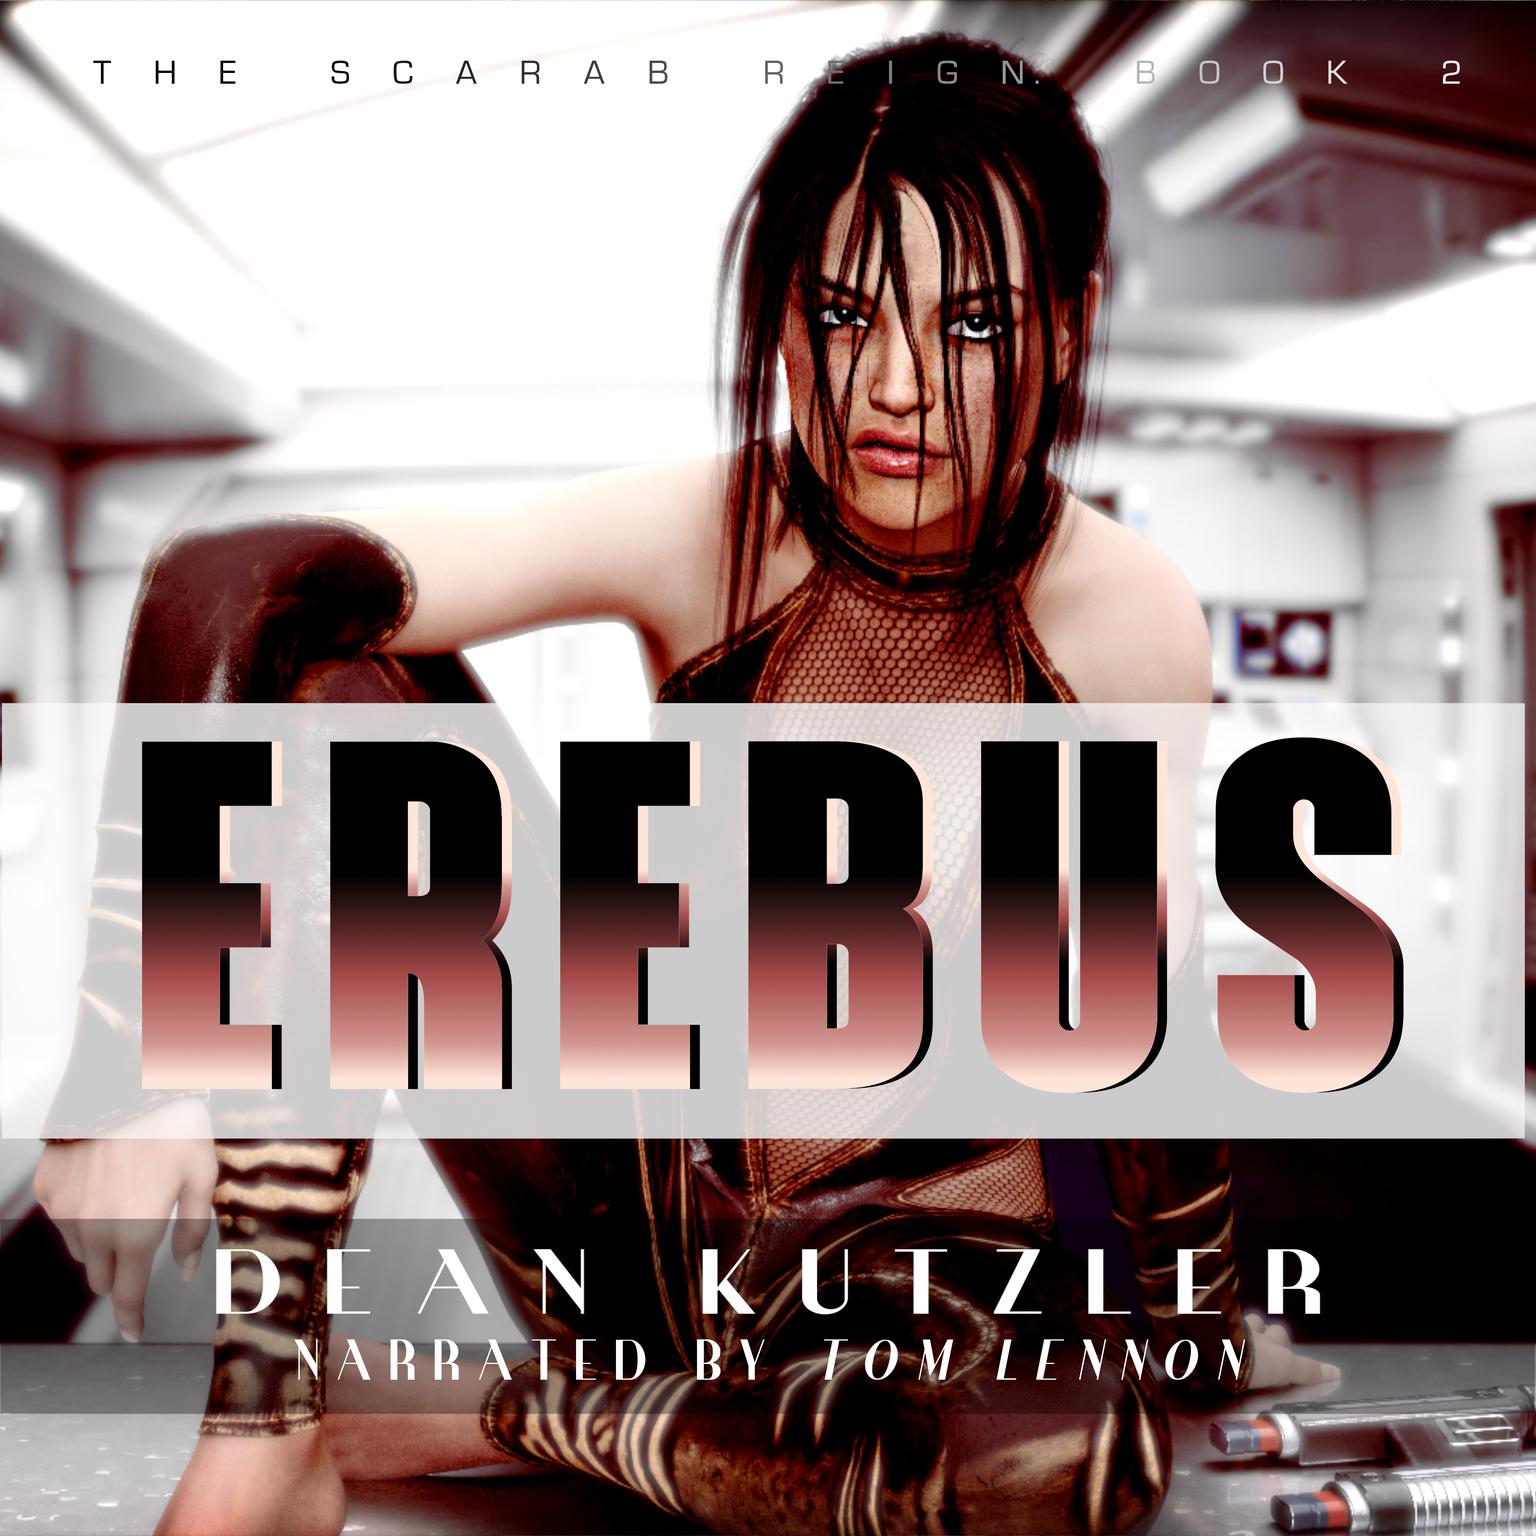 Erebus: The Scarab Reign Book 2 Audiobook, by Dean Kutzler